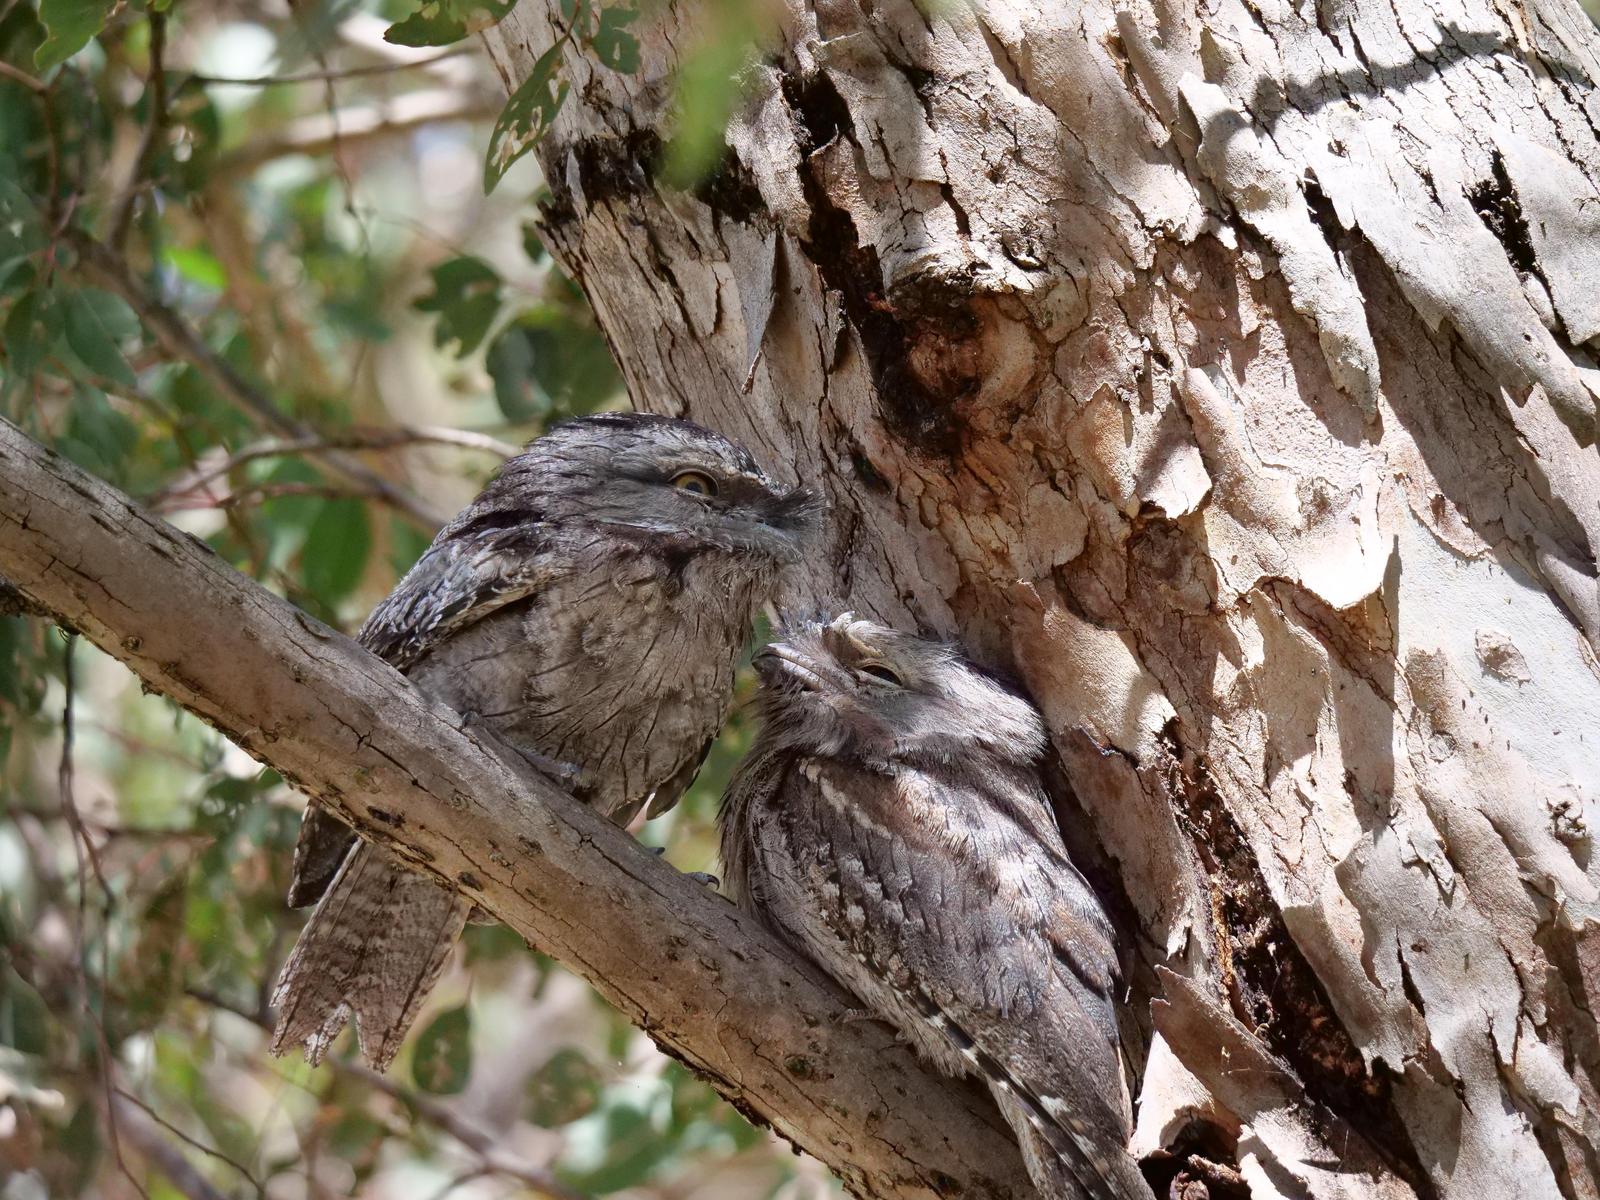 Tawny Frogmouth Photo by Peter Lowe